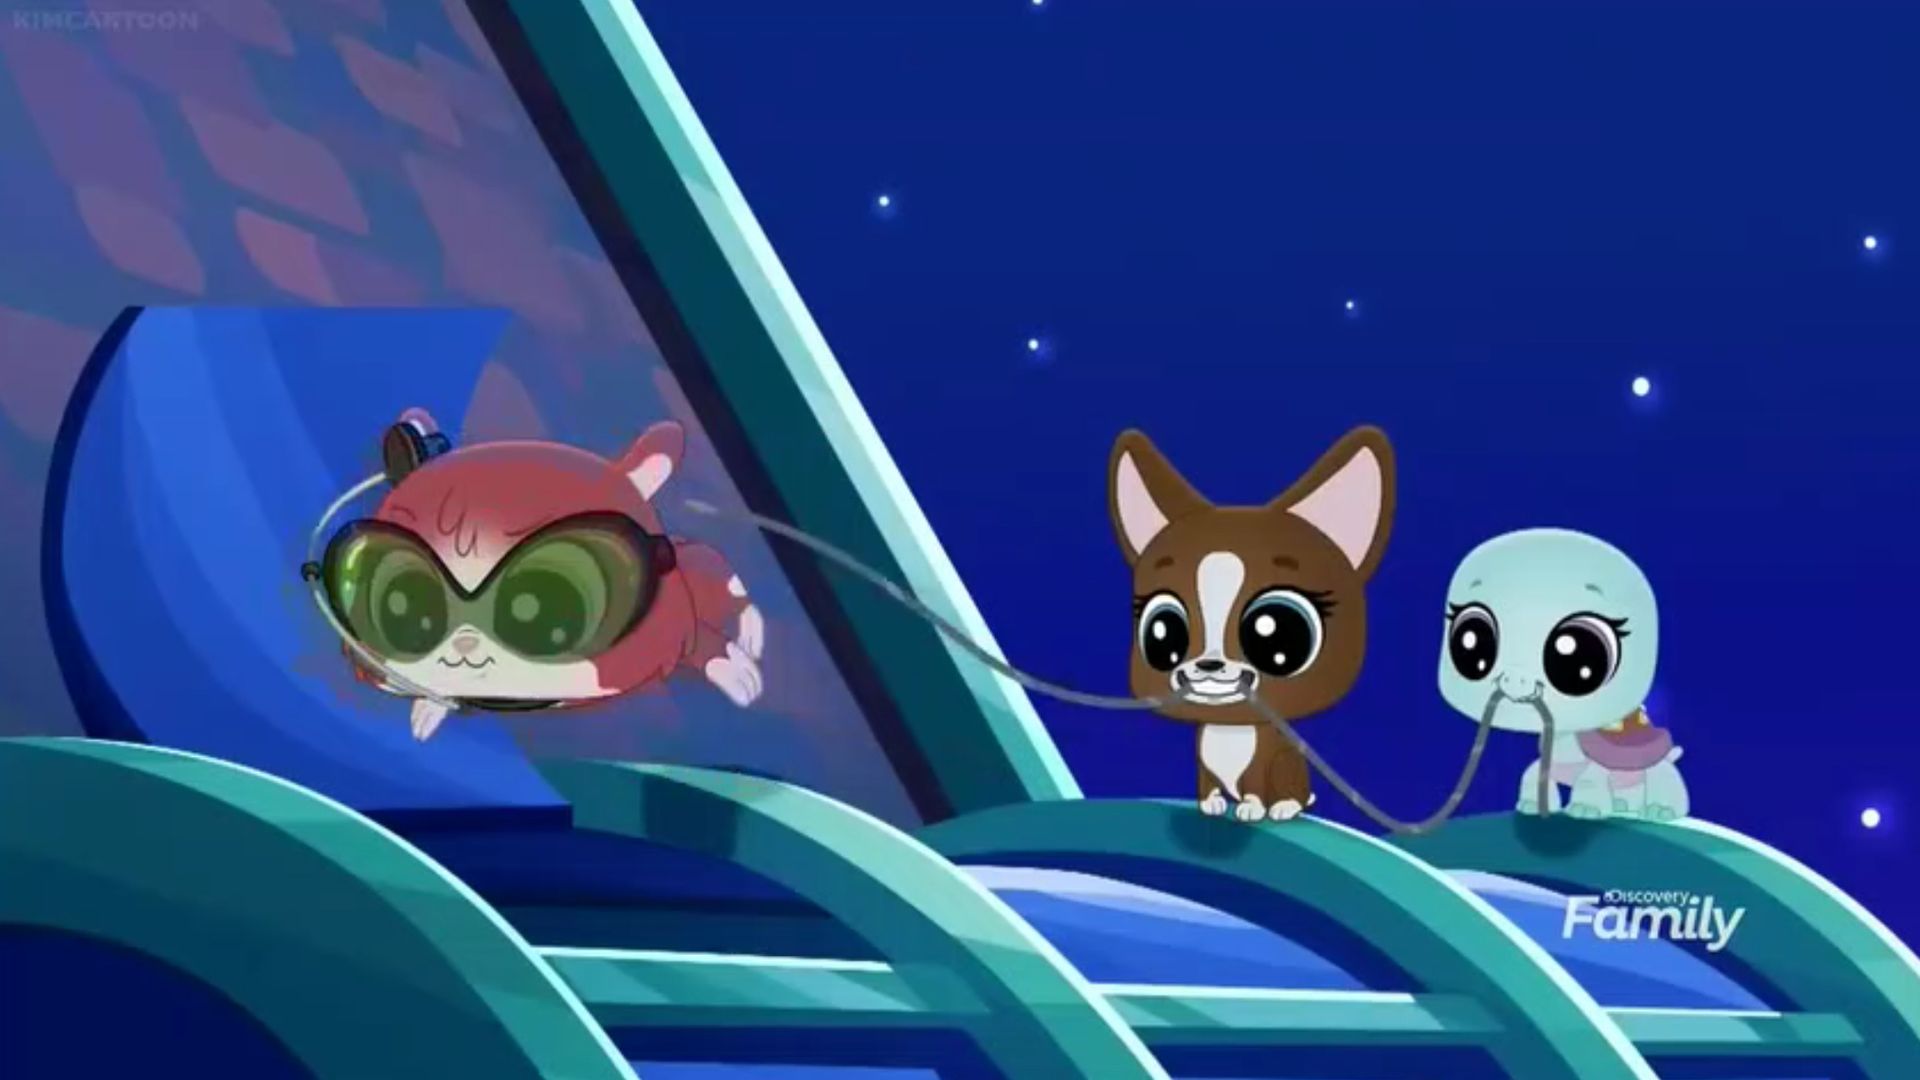 Littlest Pet Shop: A World of Our Own background